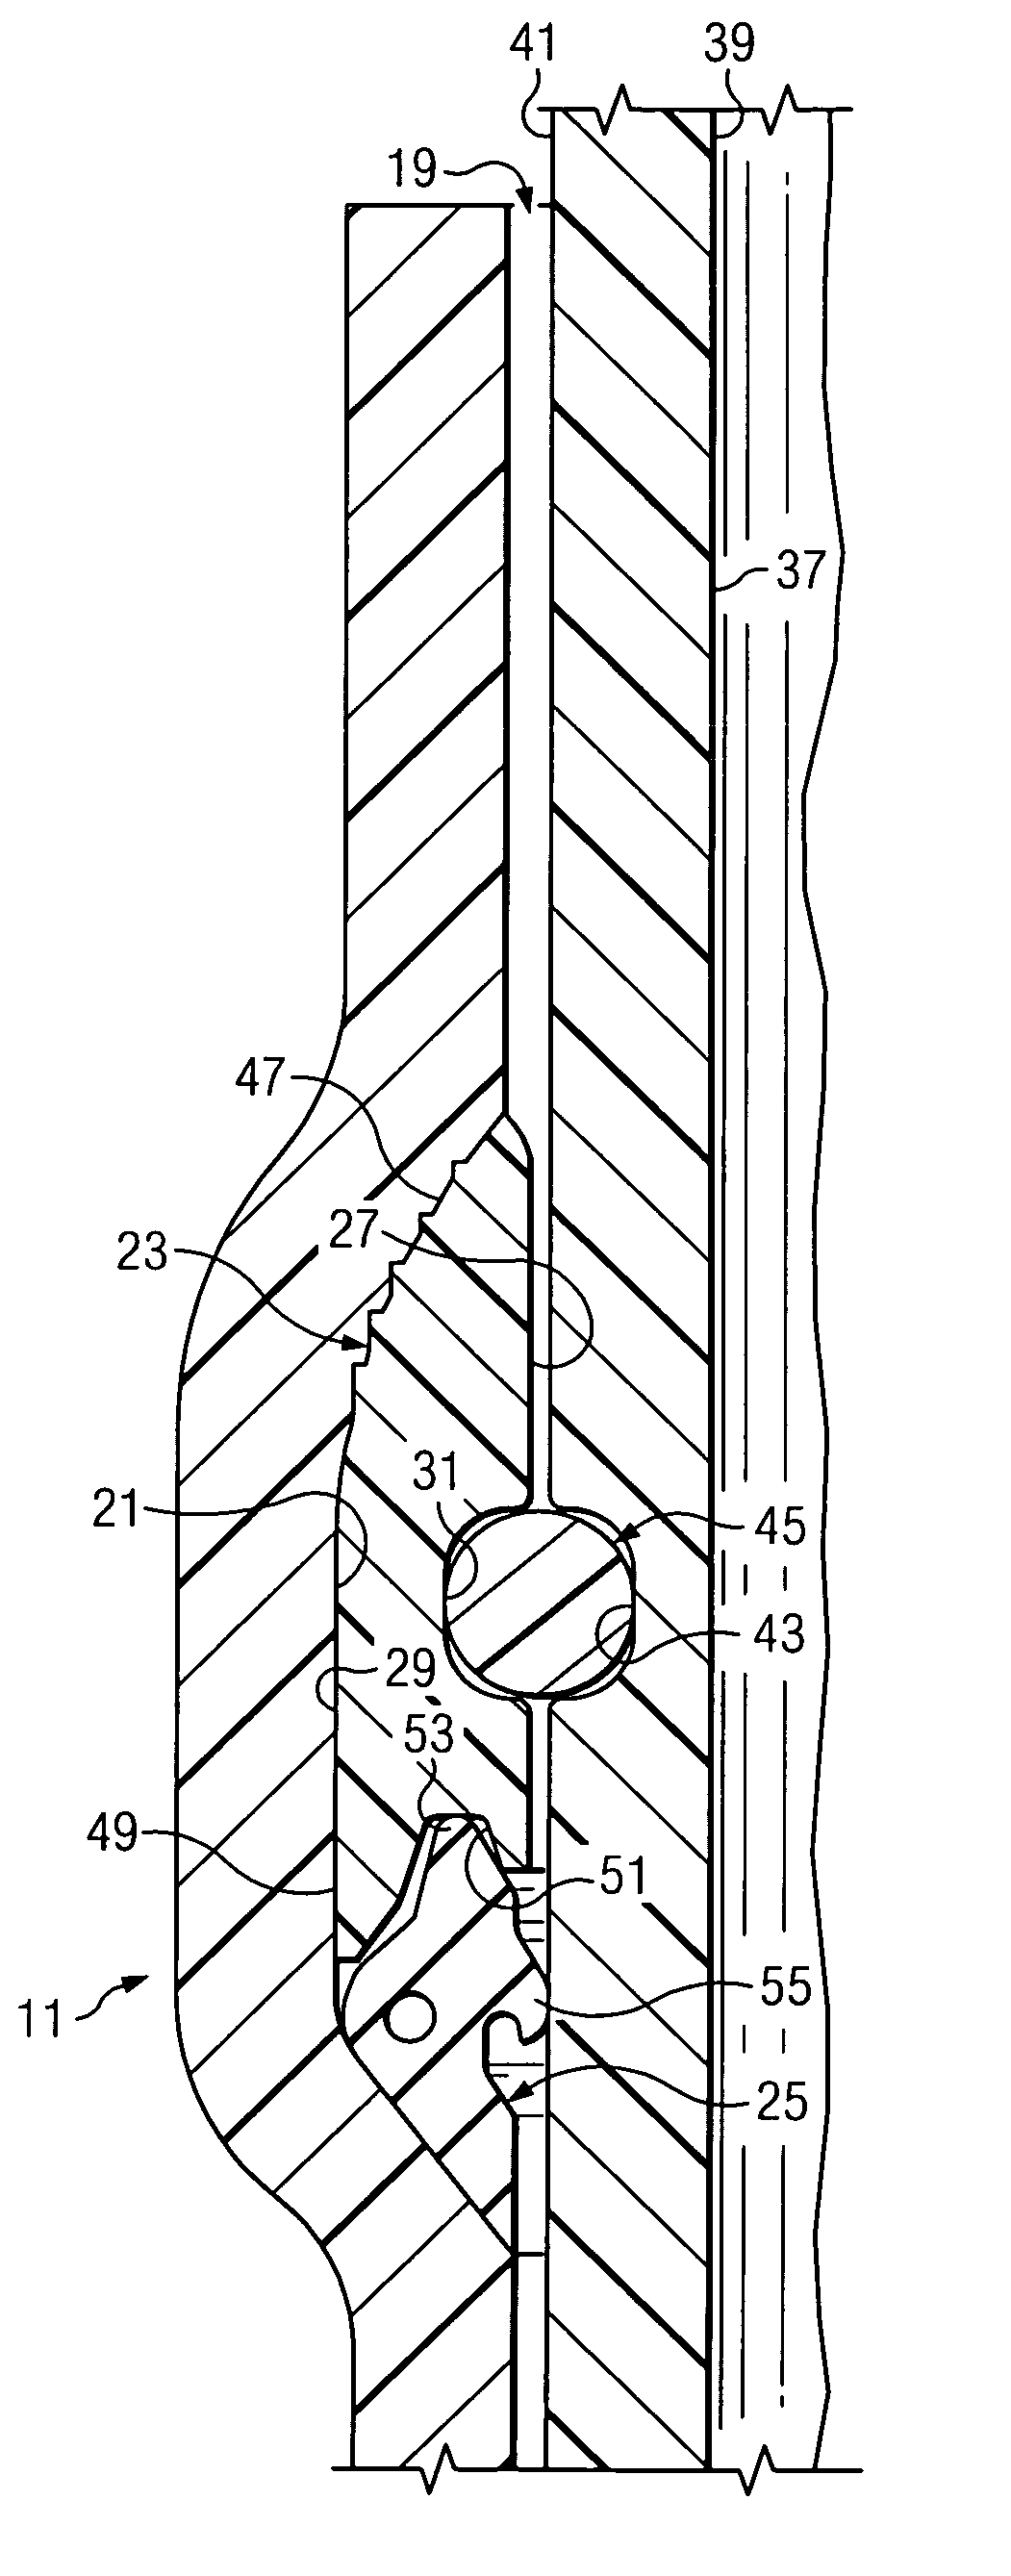 Restrained pipe joining system for plastic pipe